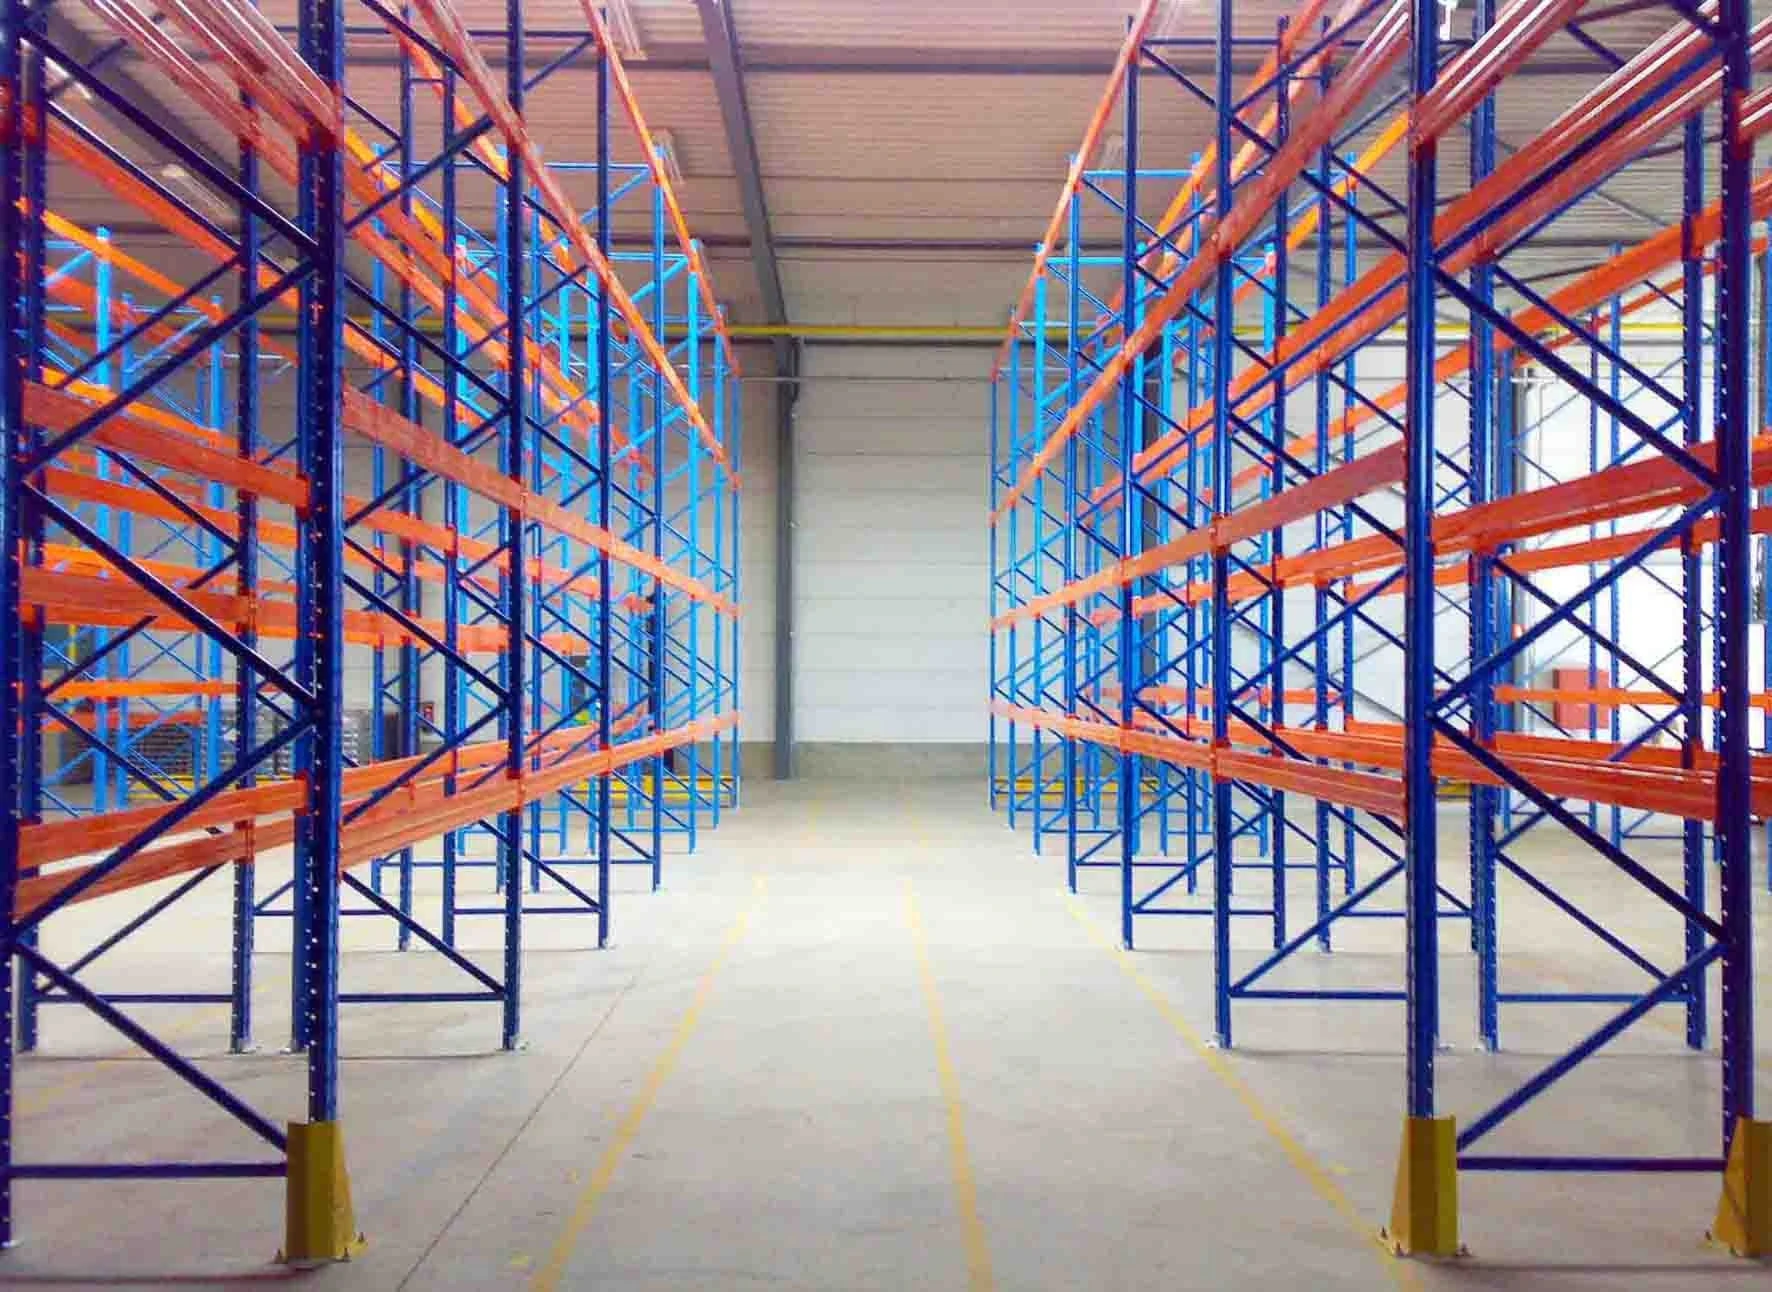 Commercial Furniture General Used Rack/Metal Material heavy duty storage racking/Warehouse stocking shelf